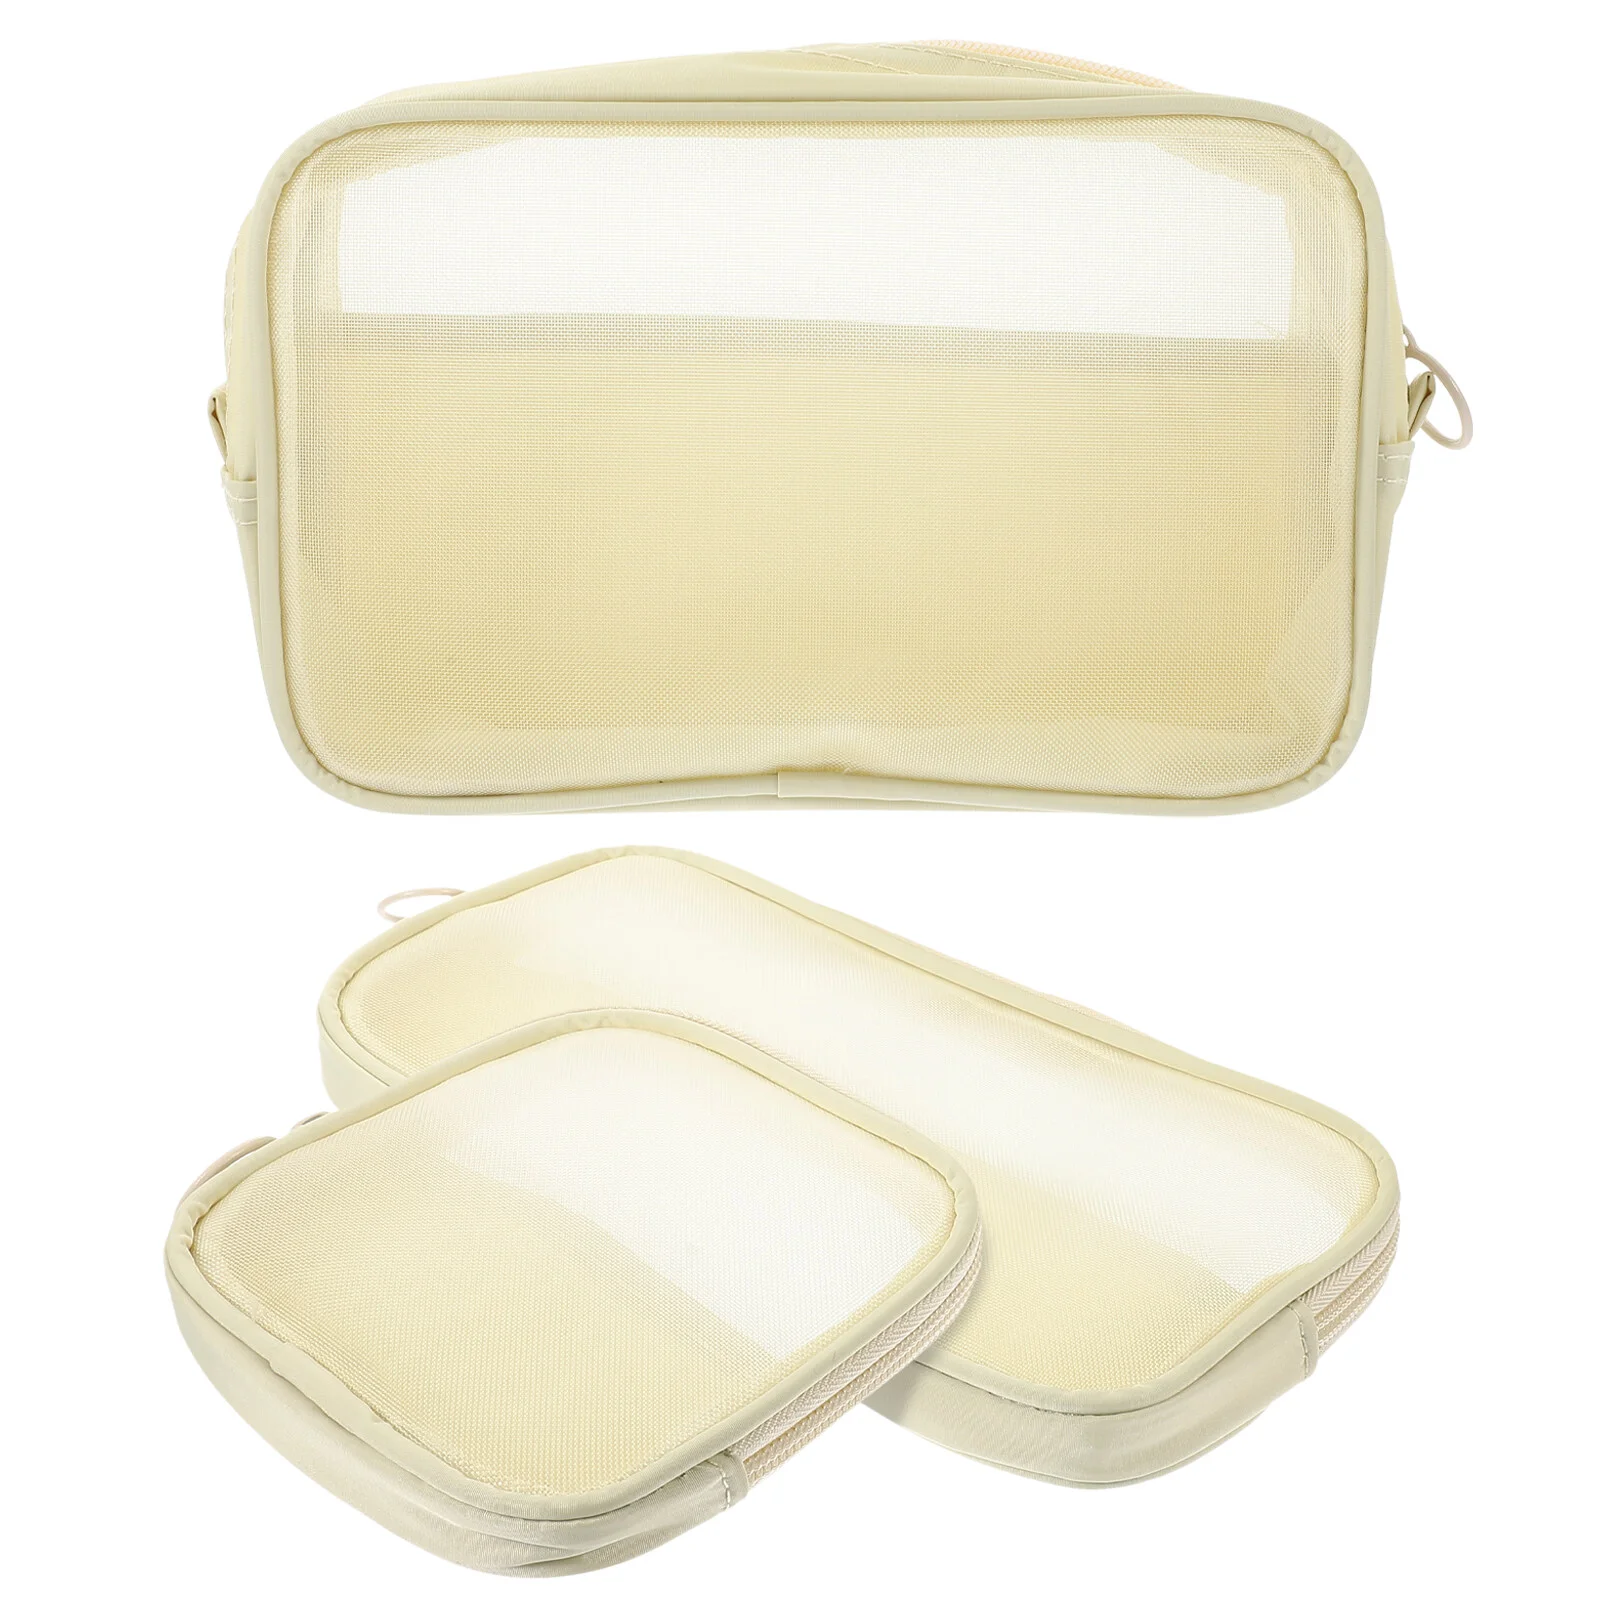 

3 Pcs Travel Toiletry Bag Travel Make Bag Portable Storage Makeup Zippered Bags Three-dimensional Pouch Polyester Pouches